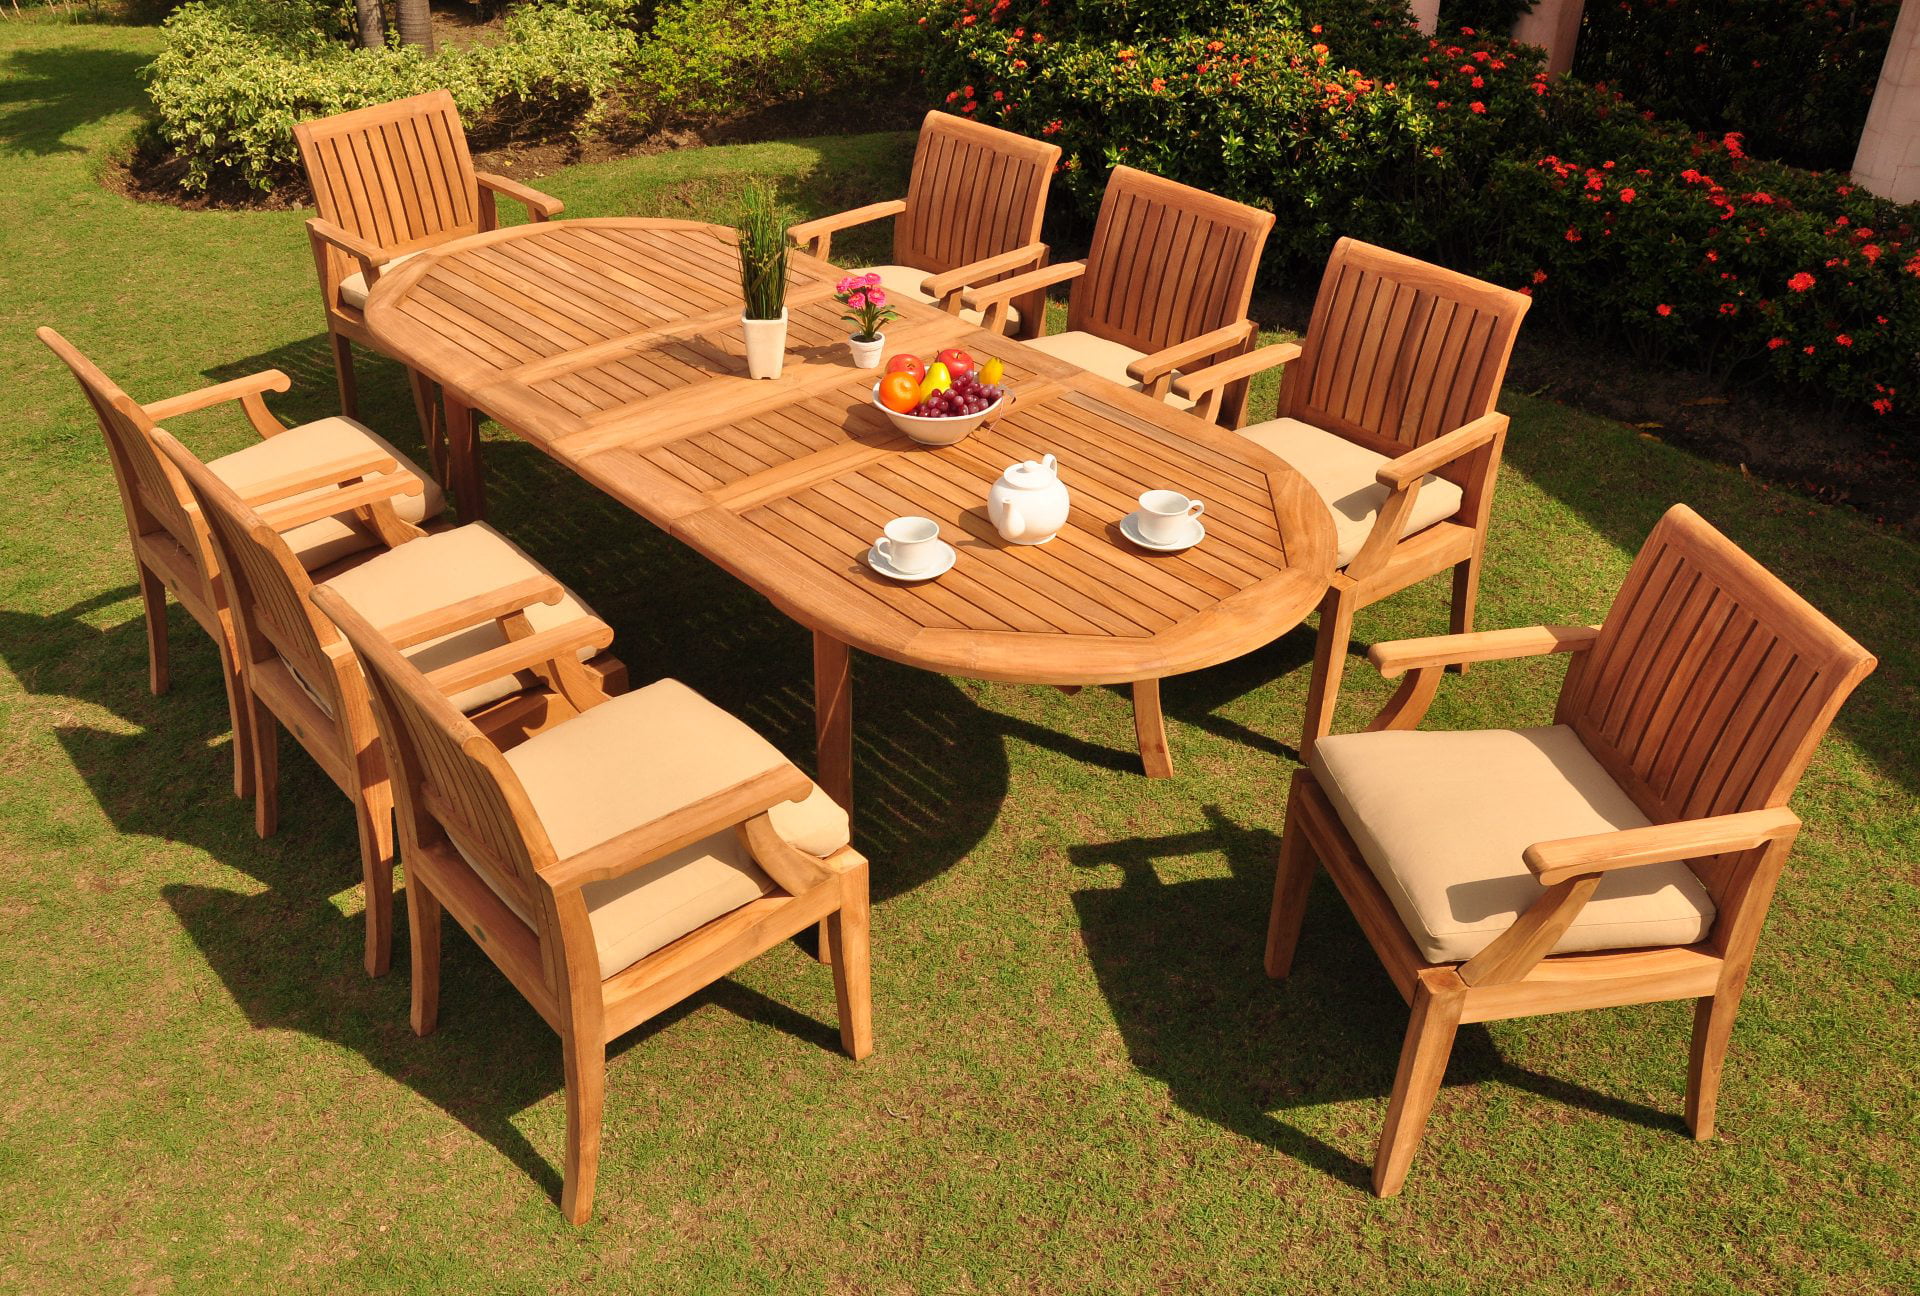 10 Reasons Why Teak Furniture Is The Best Choice For Your Outdoor Living Space